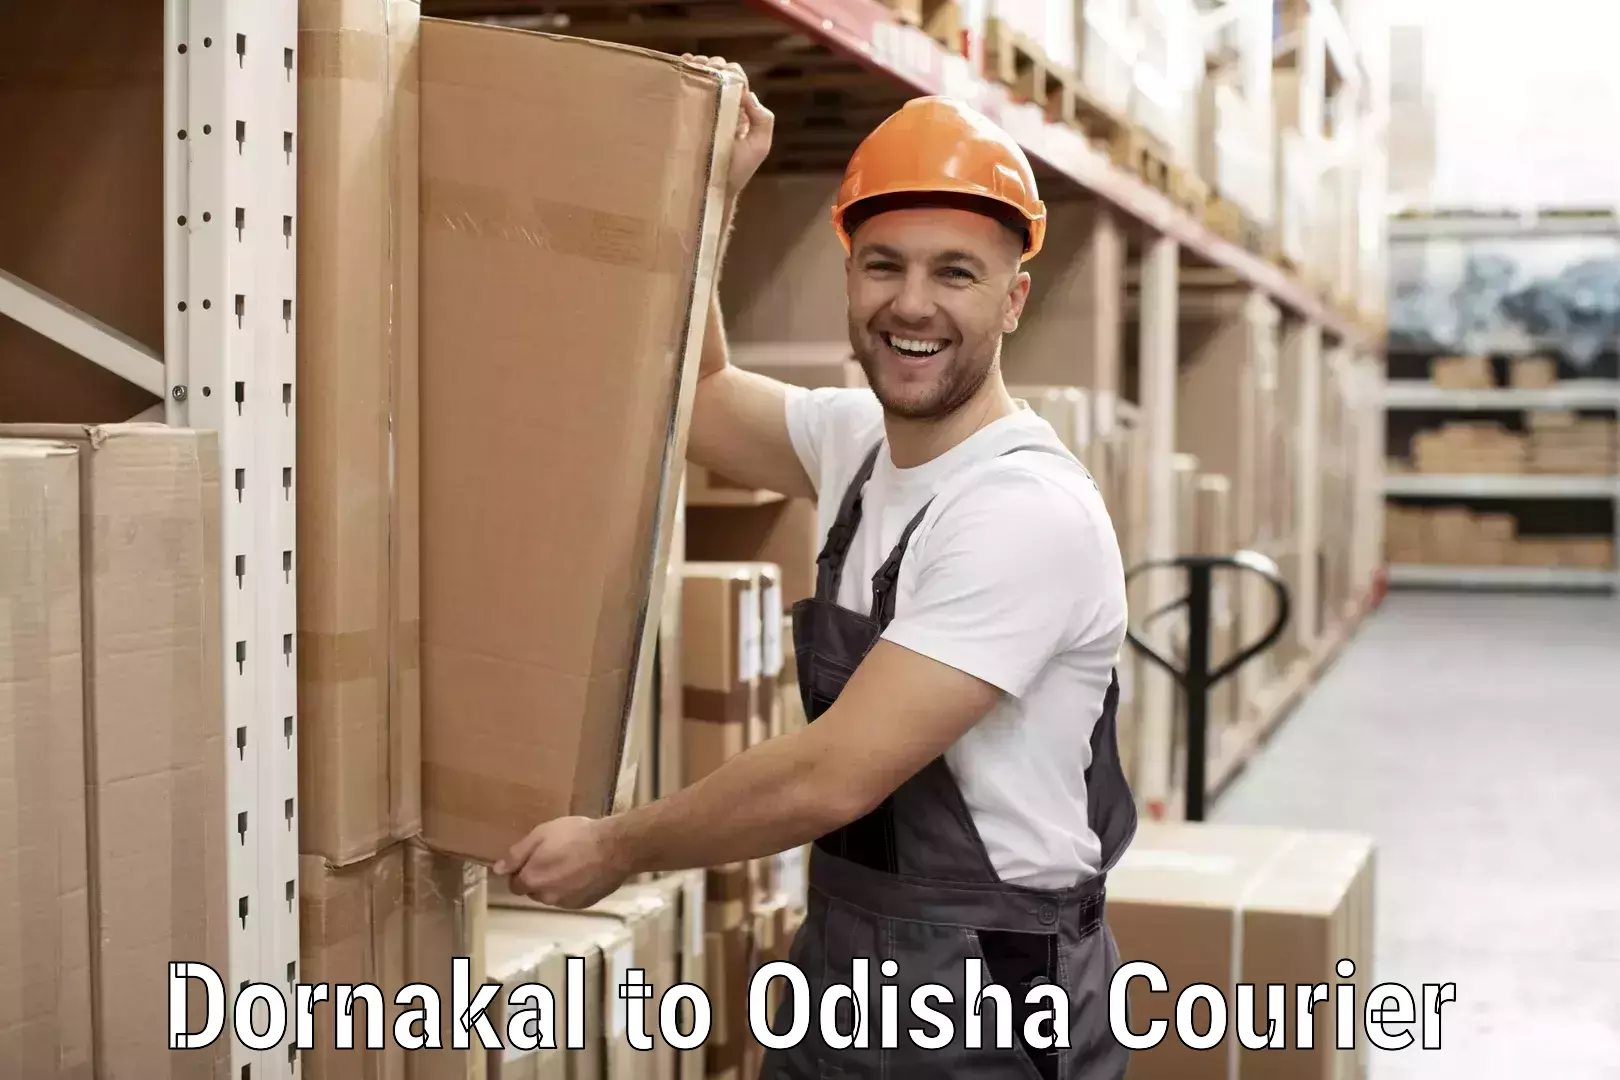 Residential courier service Dornakal to Talcher